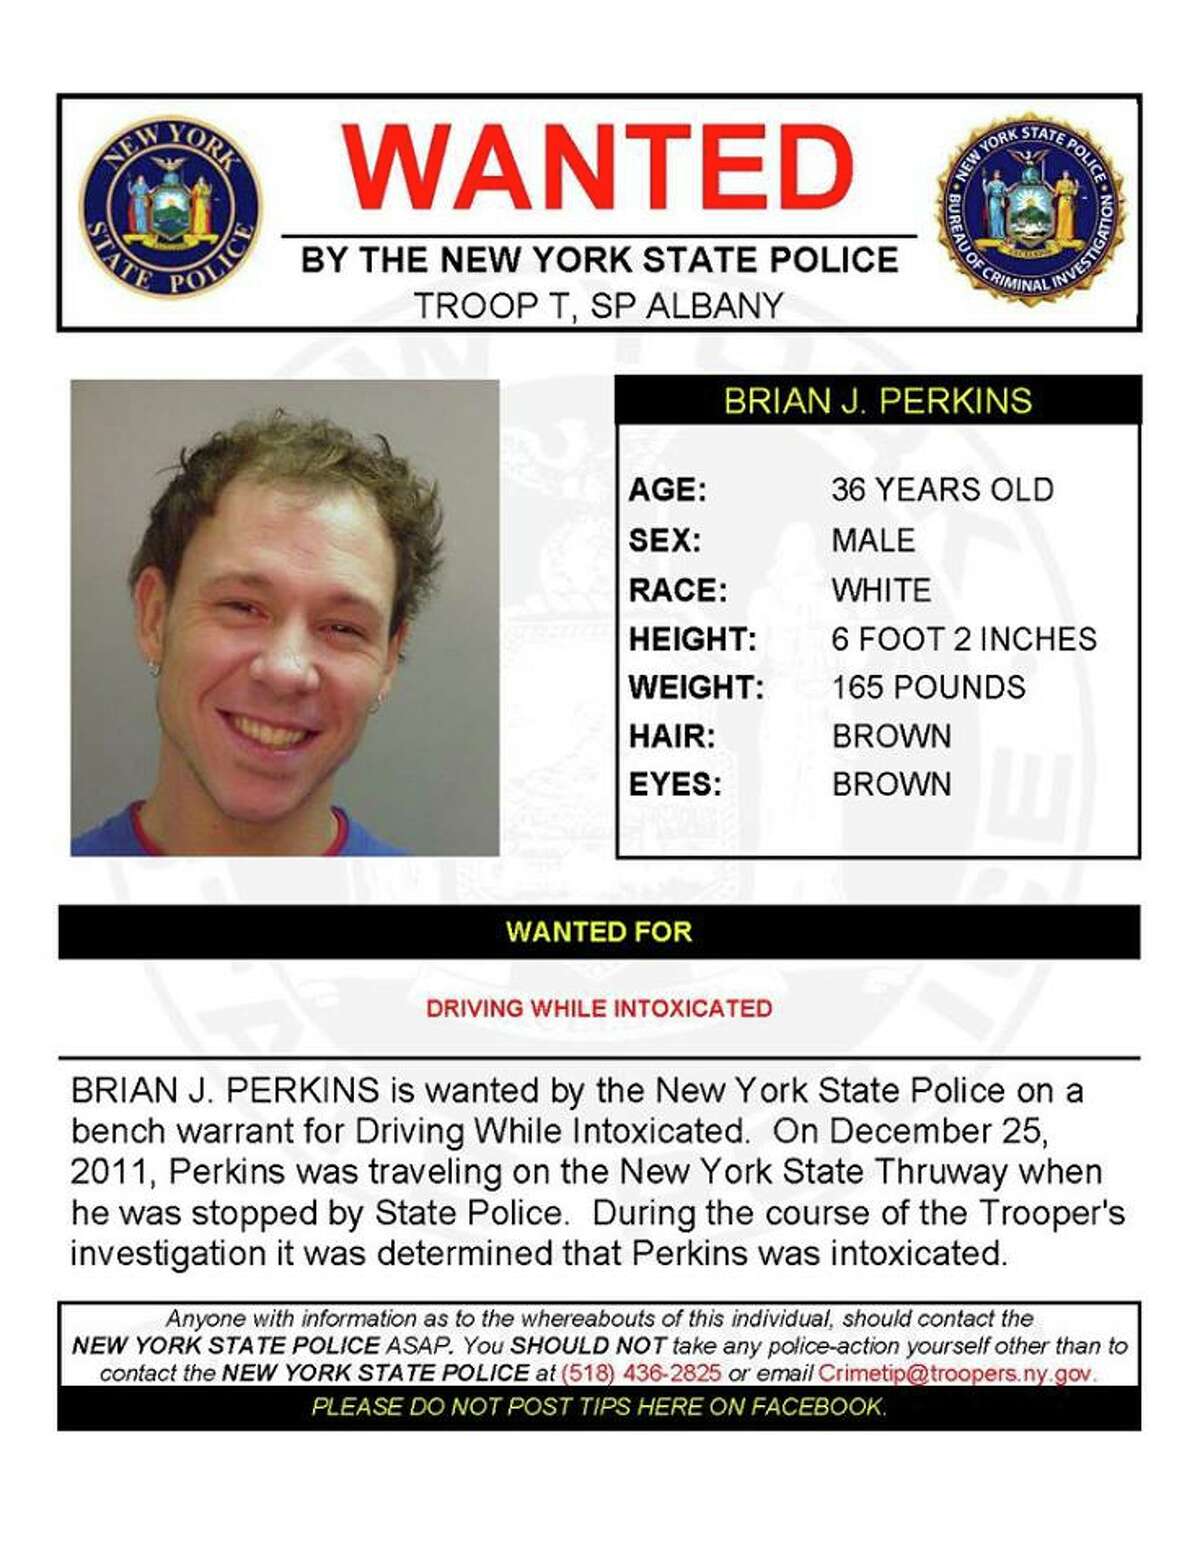 Brian J. Perkins, 36, is wanted by State Police in Albany on a bench warrant for driving while intoxicated. On Dec. 25, 2011, Perkins was driving on the Thruway when he was stopped by State Police and the trooper determined Perkins was intoxicated. (State Police)